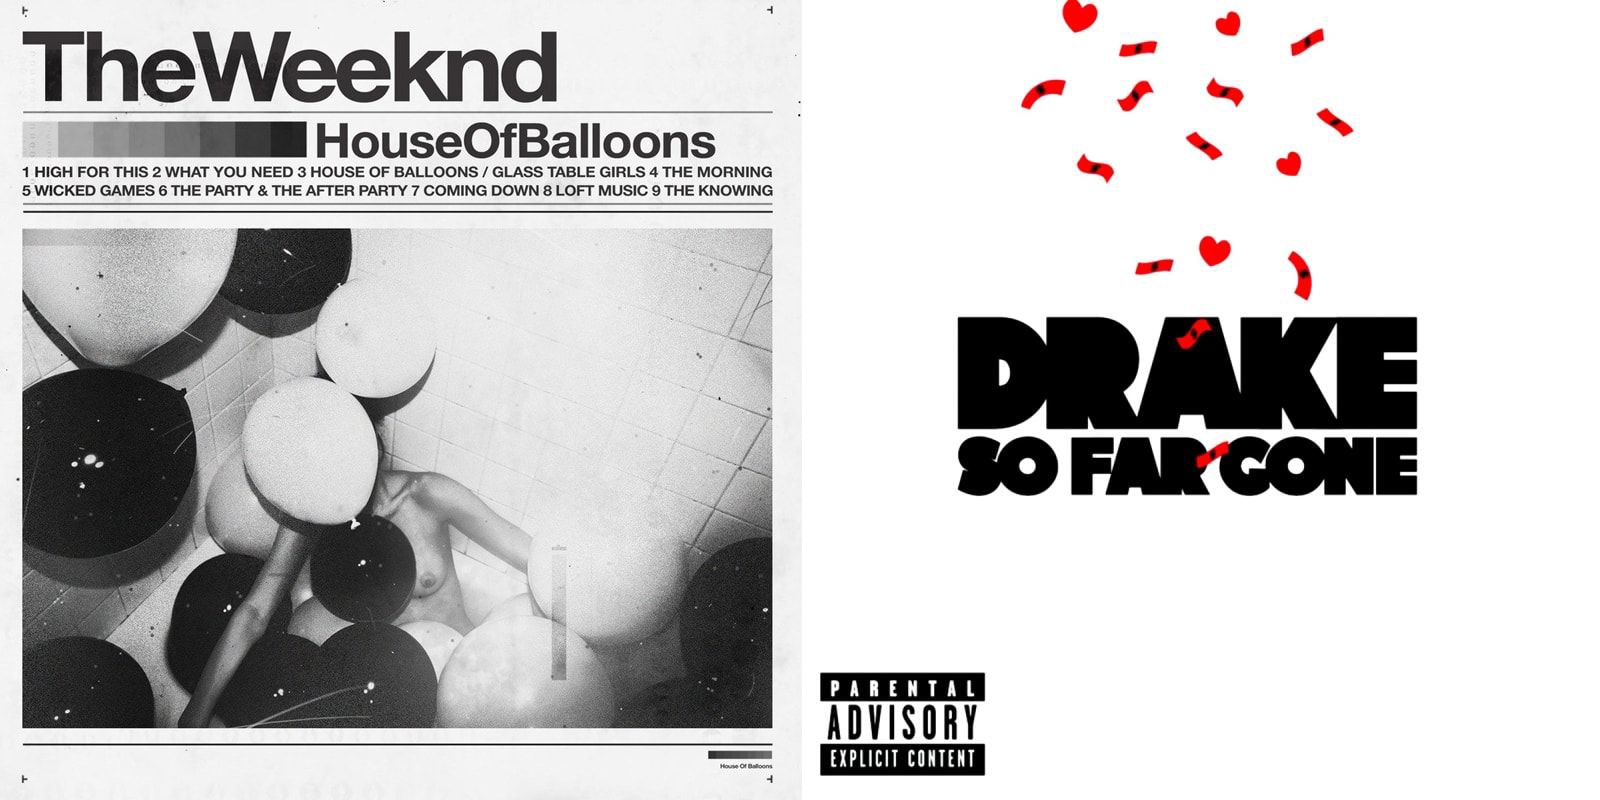 Drake So Far Gone The Weeknd House of Balloons Covers